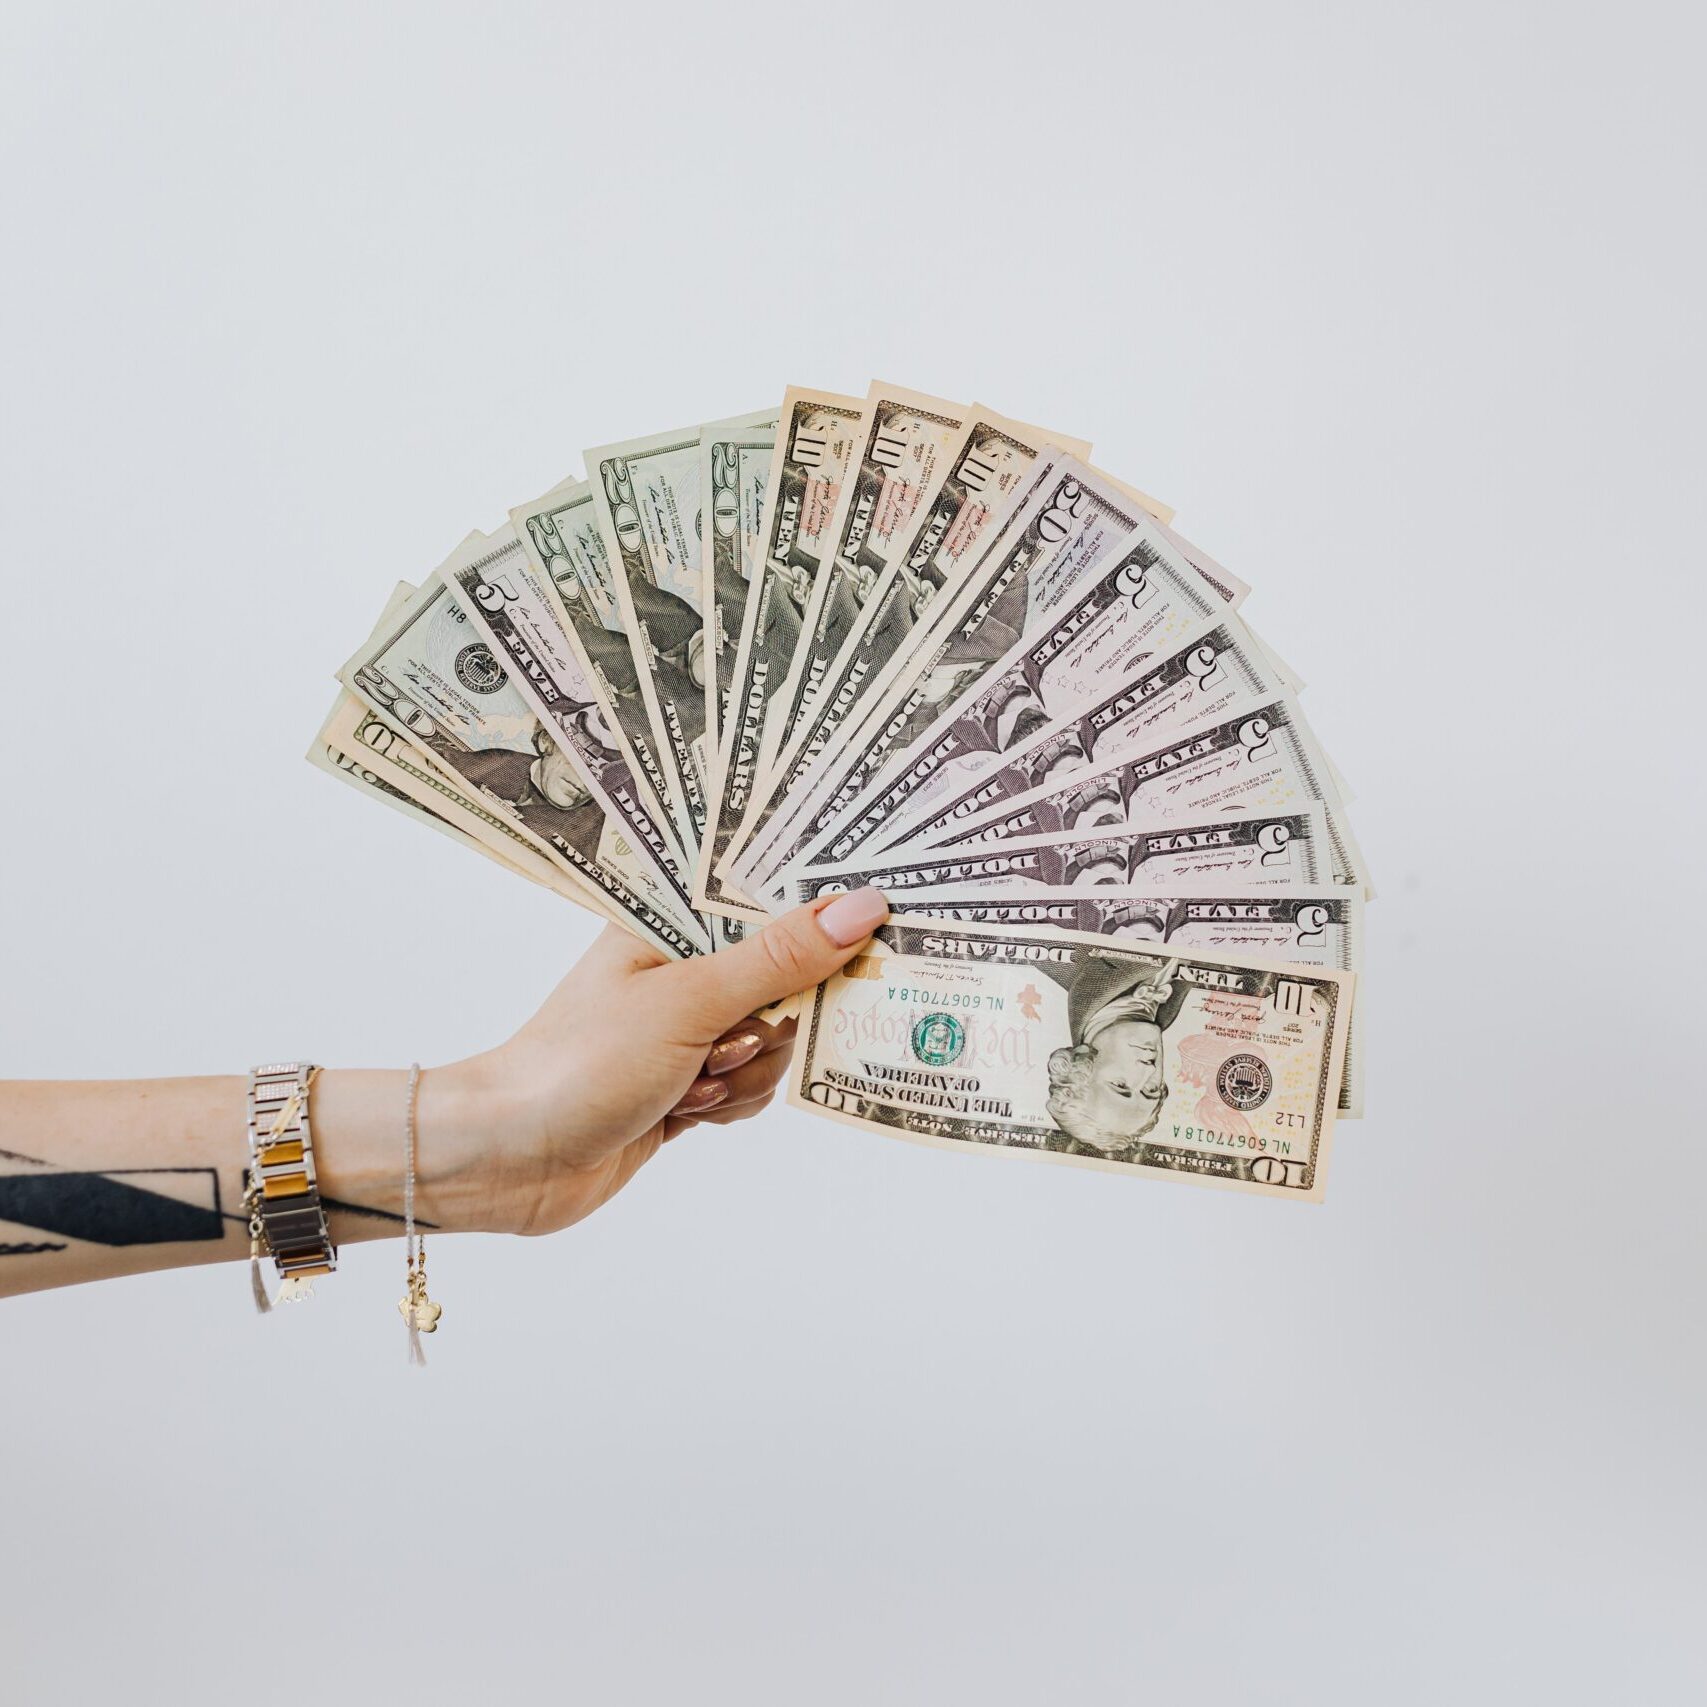 A hand holding money in front of a white wall.